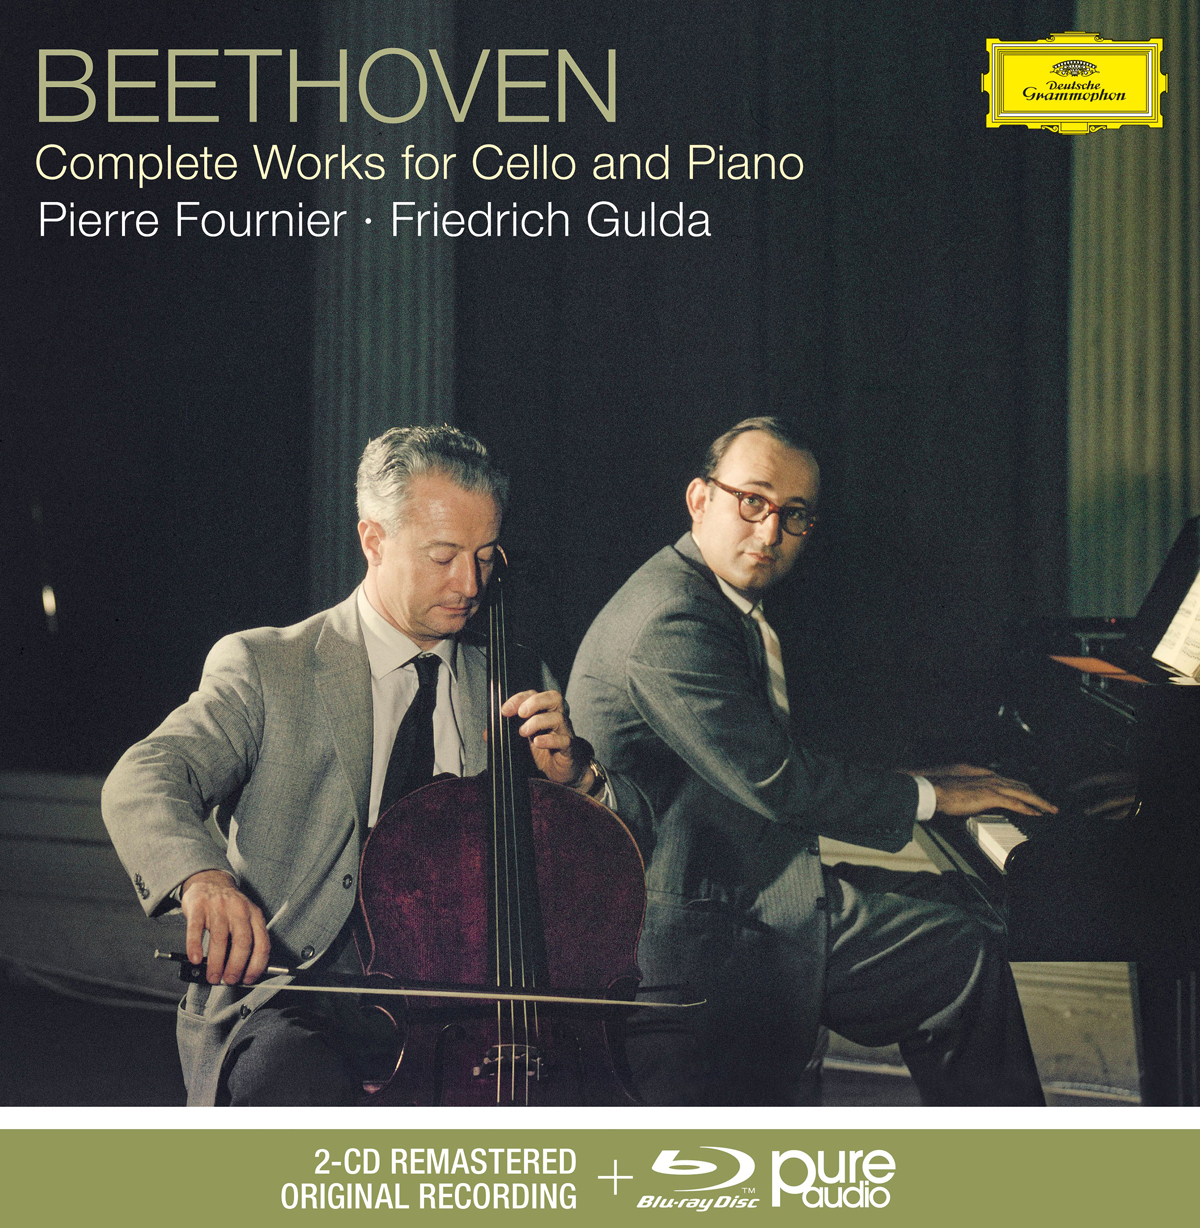 Beethoven Complete Works For Cello Piano